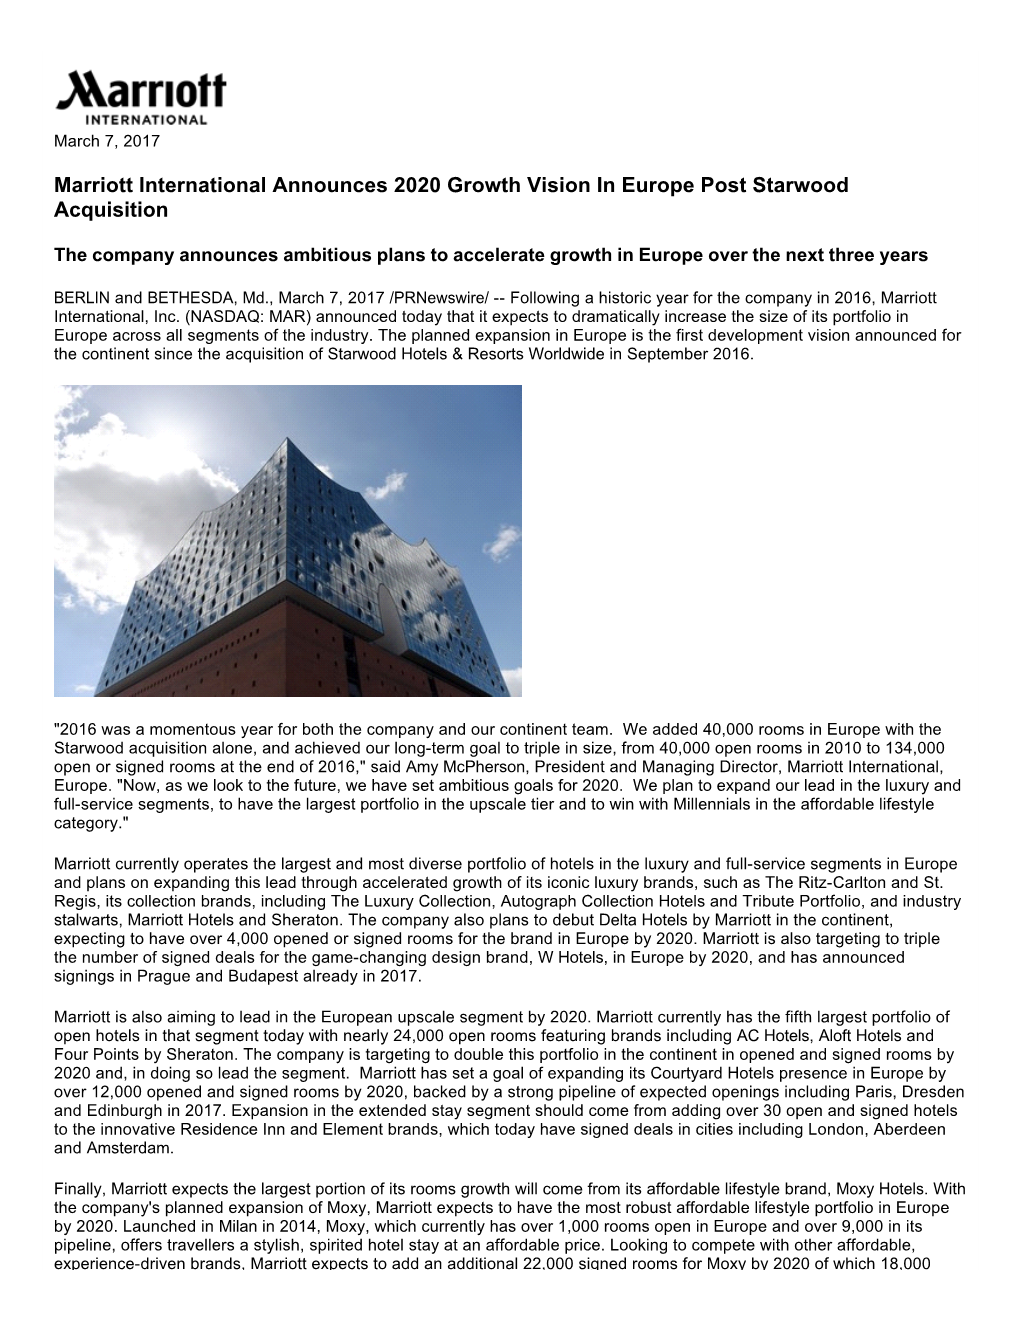 Marriott International Announces 2020 Growth Vision in Europe Post Starwood Acquisition